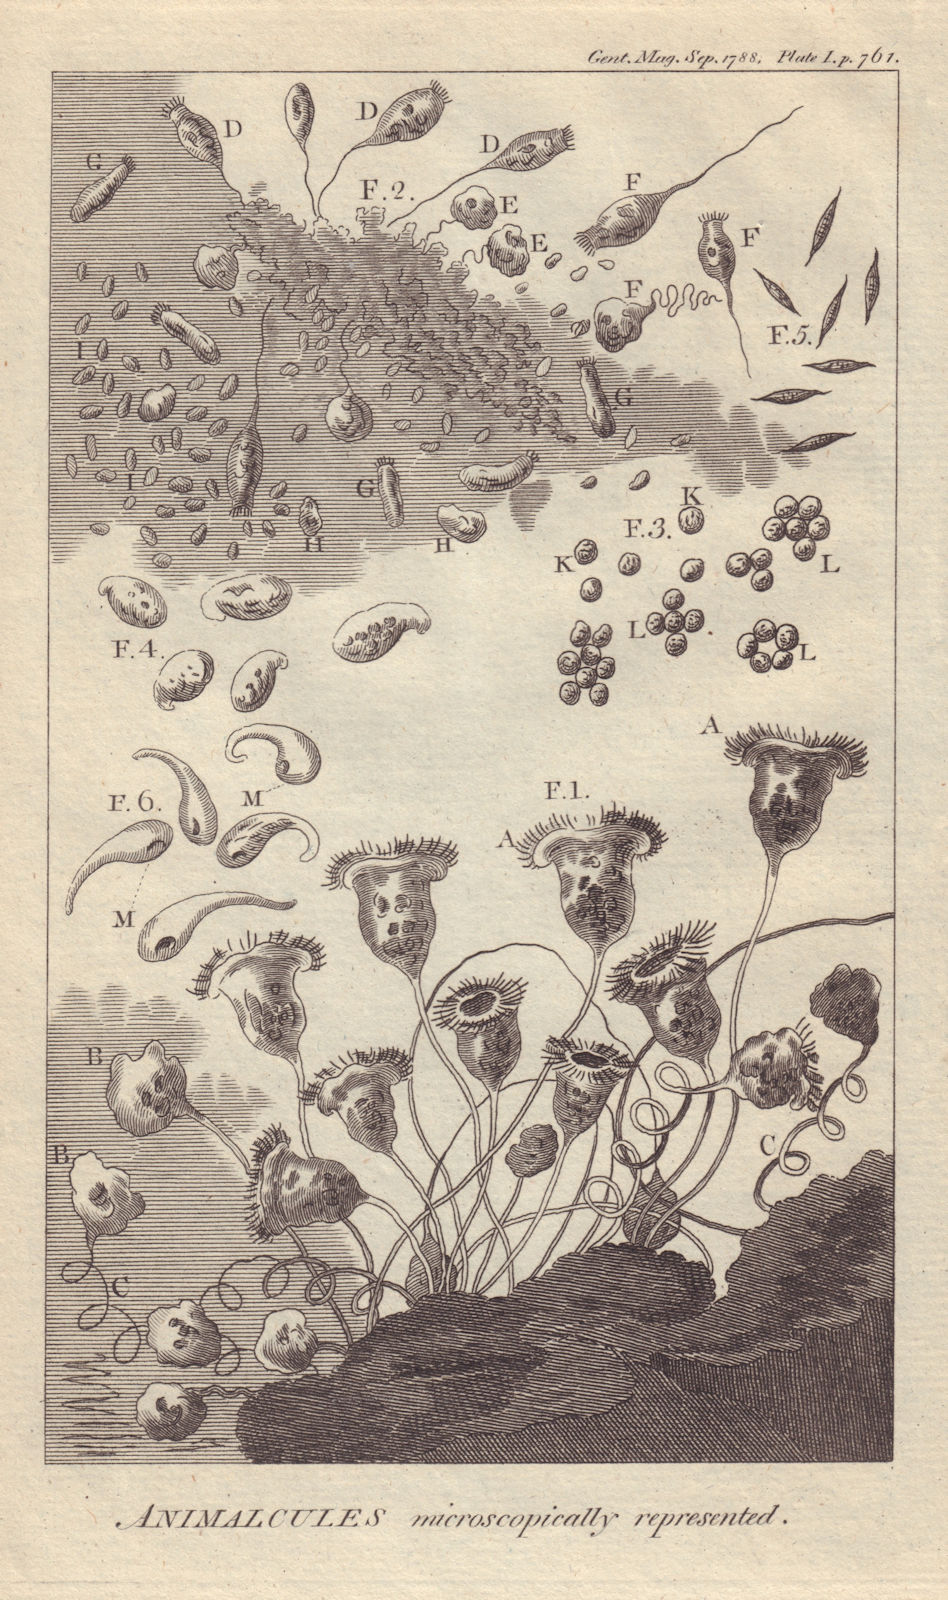 Associate Product Animalcules microscopically represented. Biology. GENTS MAG 1788 old print